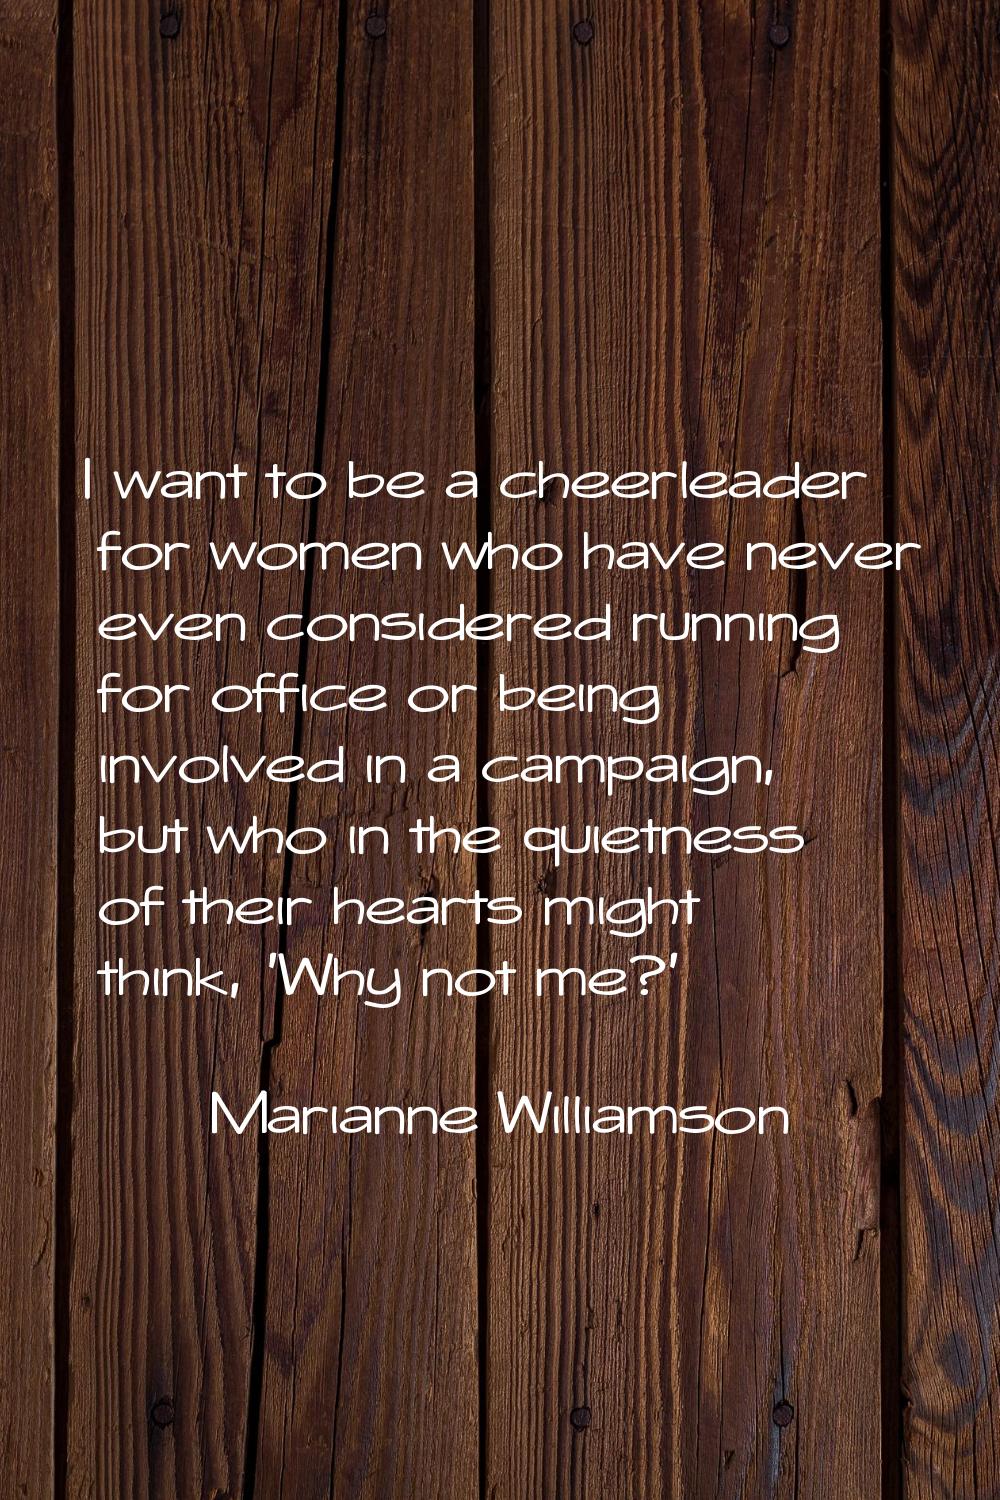 I want to be a cheerleader for women who have never even considered running for office or being inv